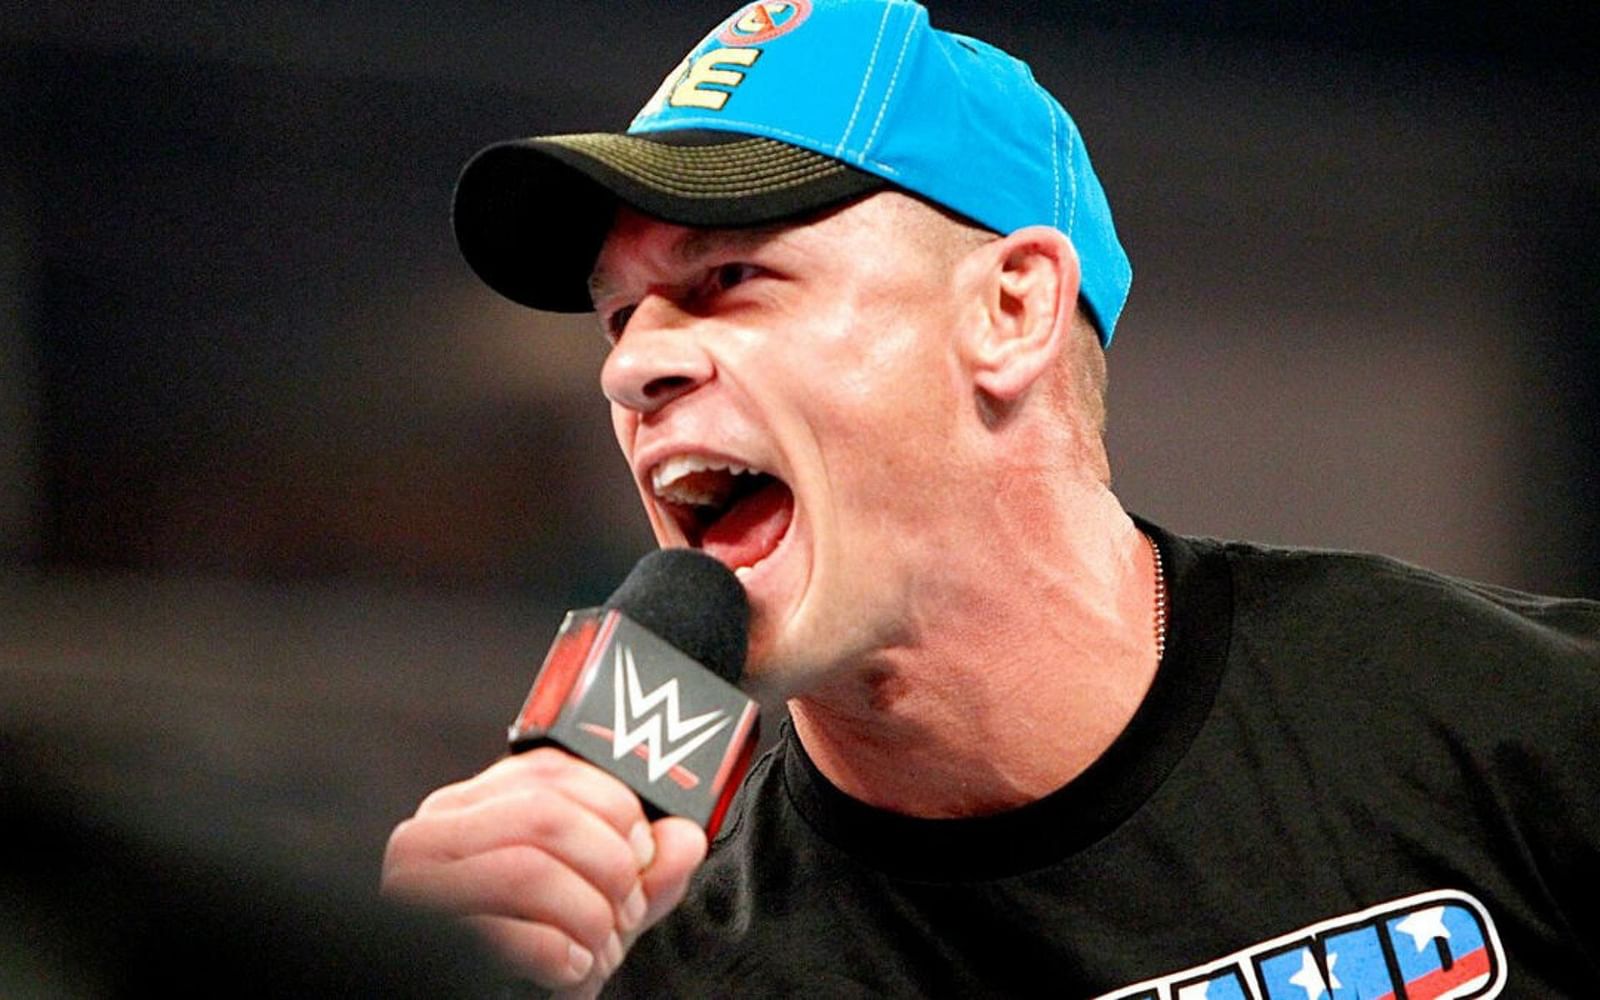 7 moments that prove John Cena is the WWE G.O.A.T.